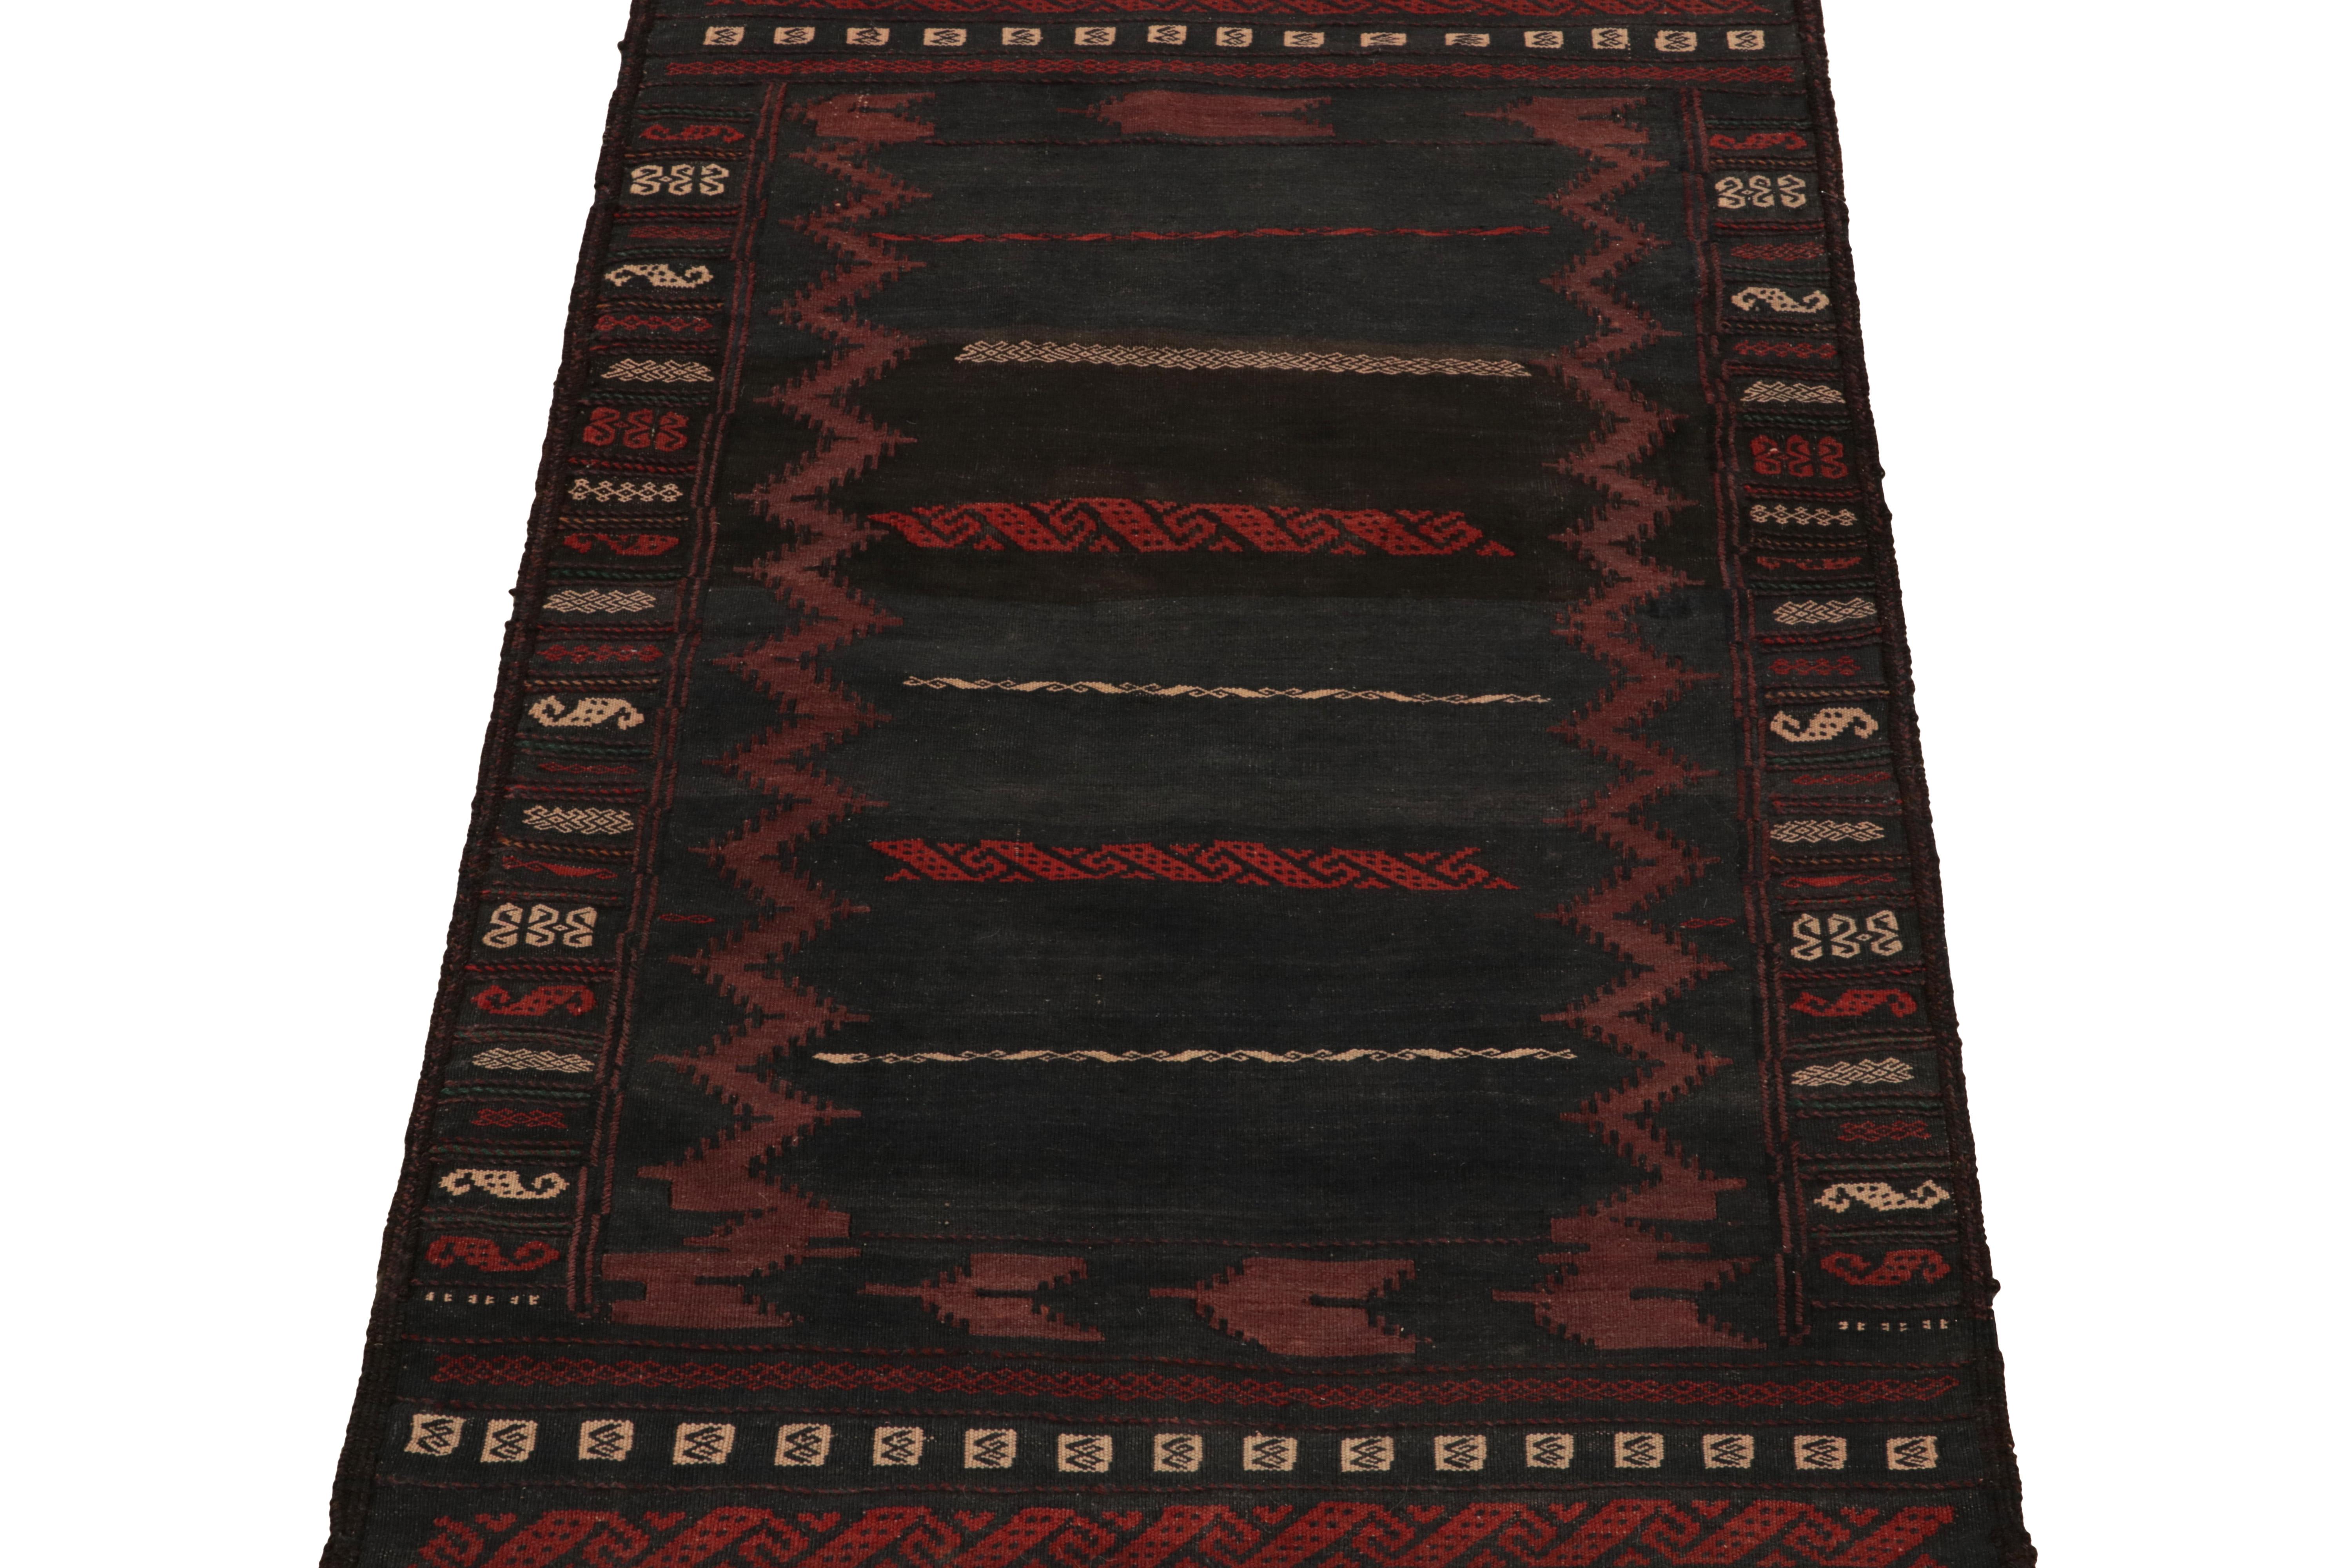 Originating from Turkey circa 1950-1960, a rare mid-century curation of small-sized kilim rugs our principal has acquired lately. 

Distinguished for both its size and progressive colorways among flat weaves of the 1950s, the piece carries a